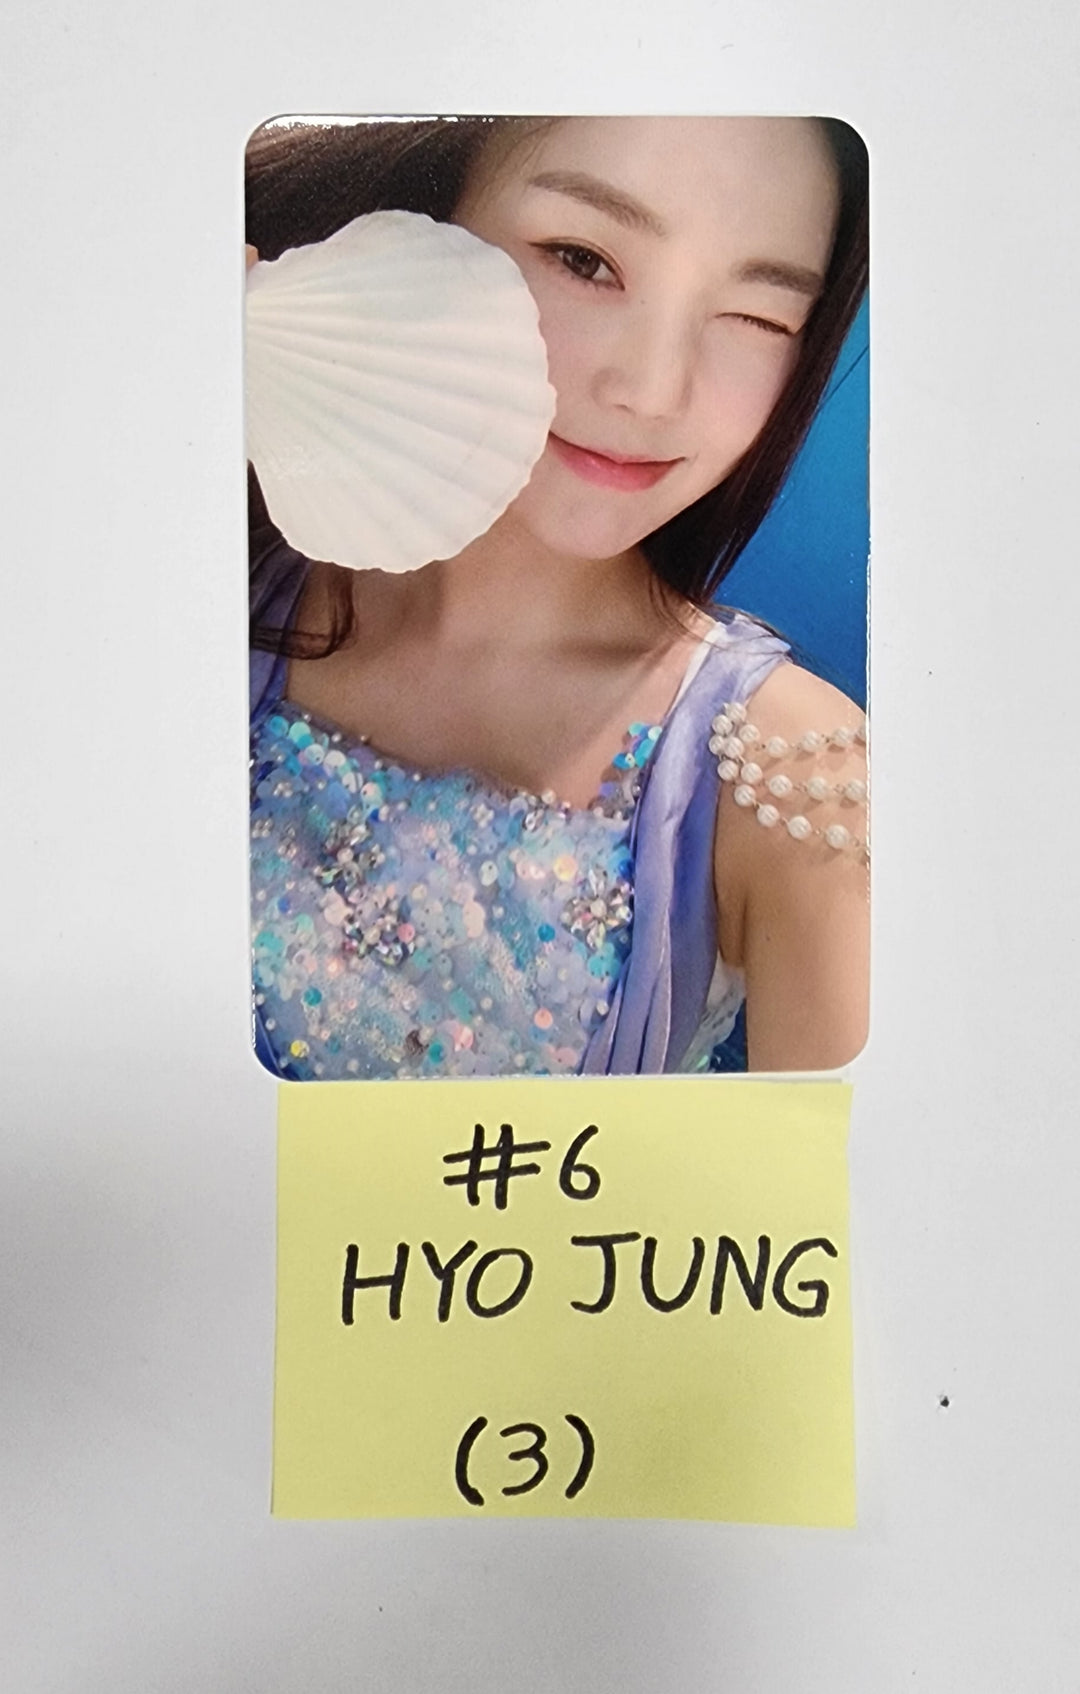 Oh My Girl "Golden Hourglass" - Official Photocard, Ticket